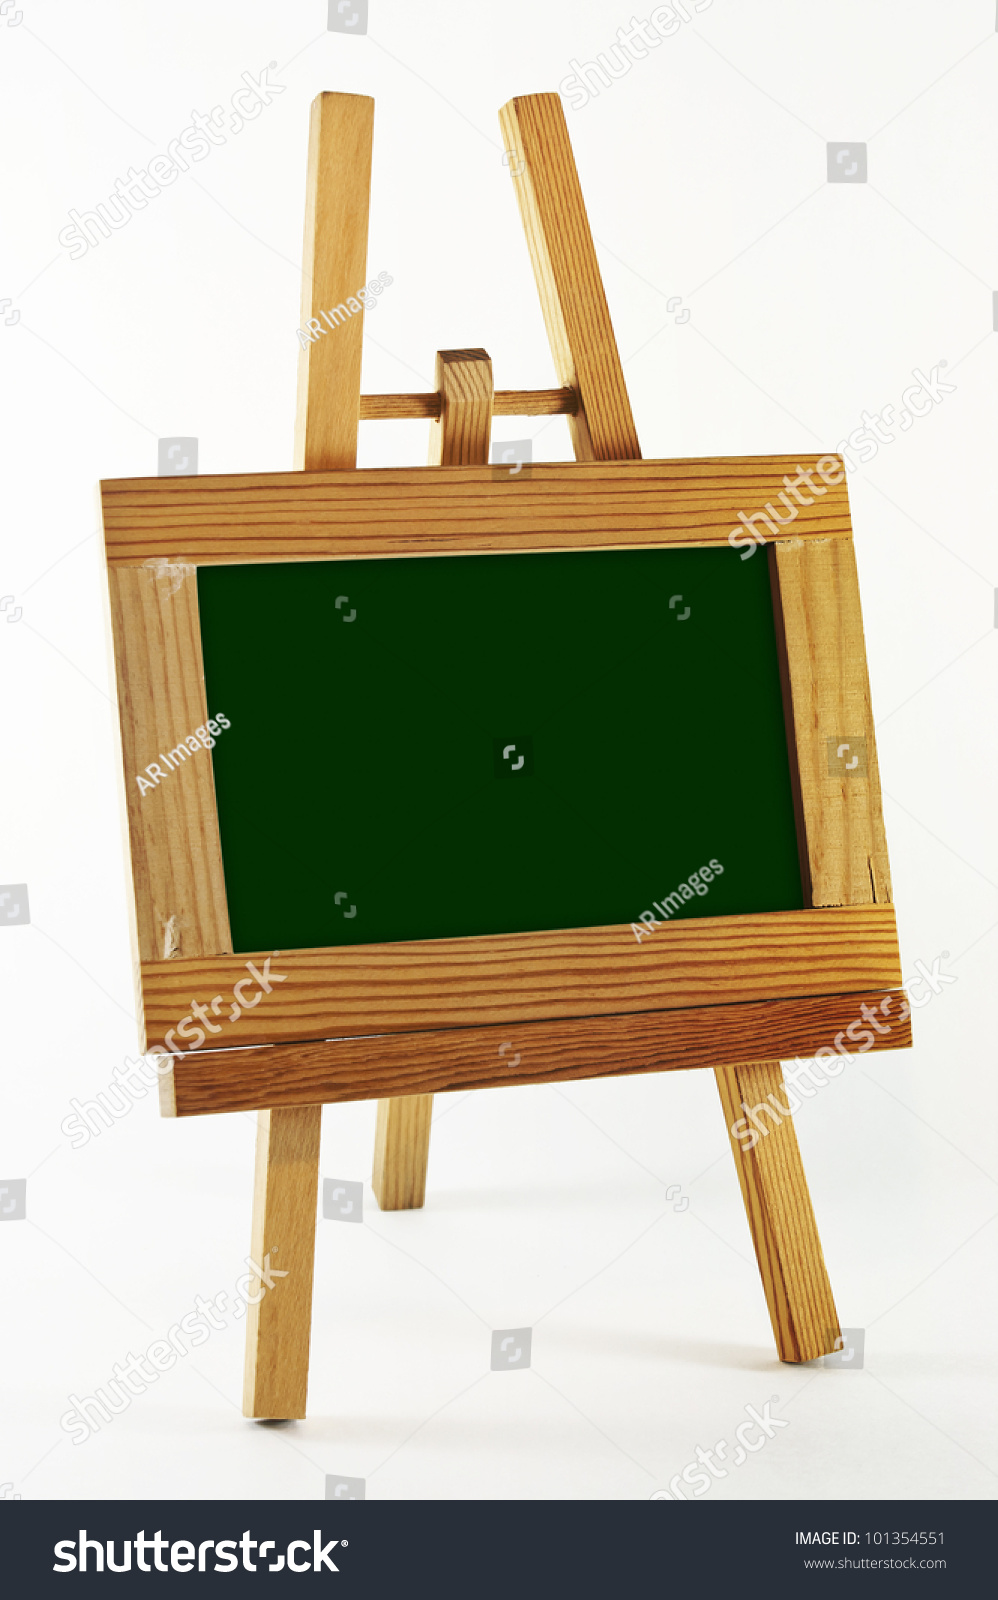 stock photo horizontal blank green chalkboard space in wooden frame on easel isolated on white 101354551